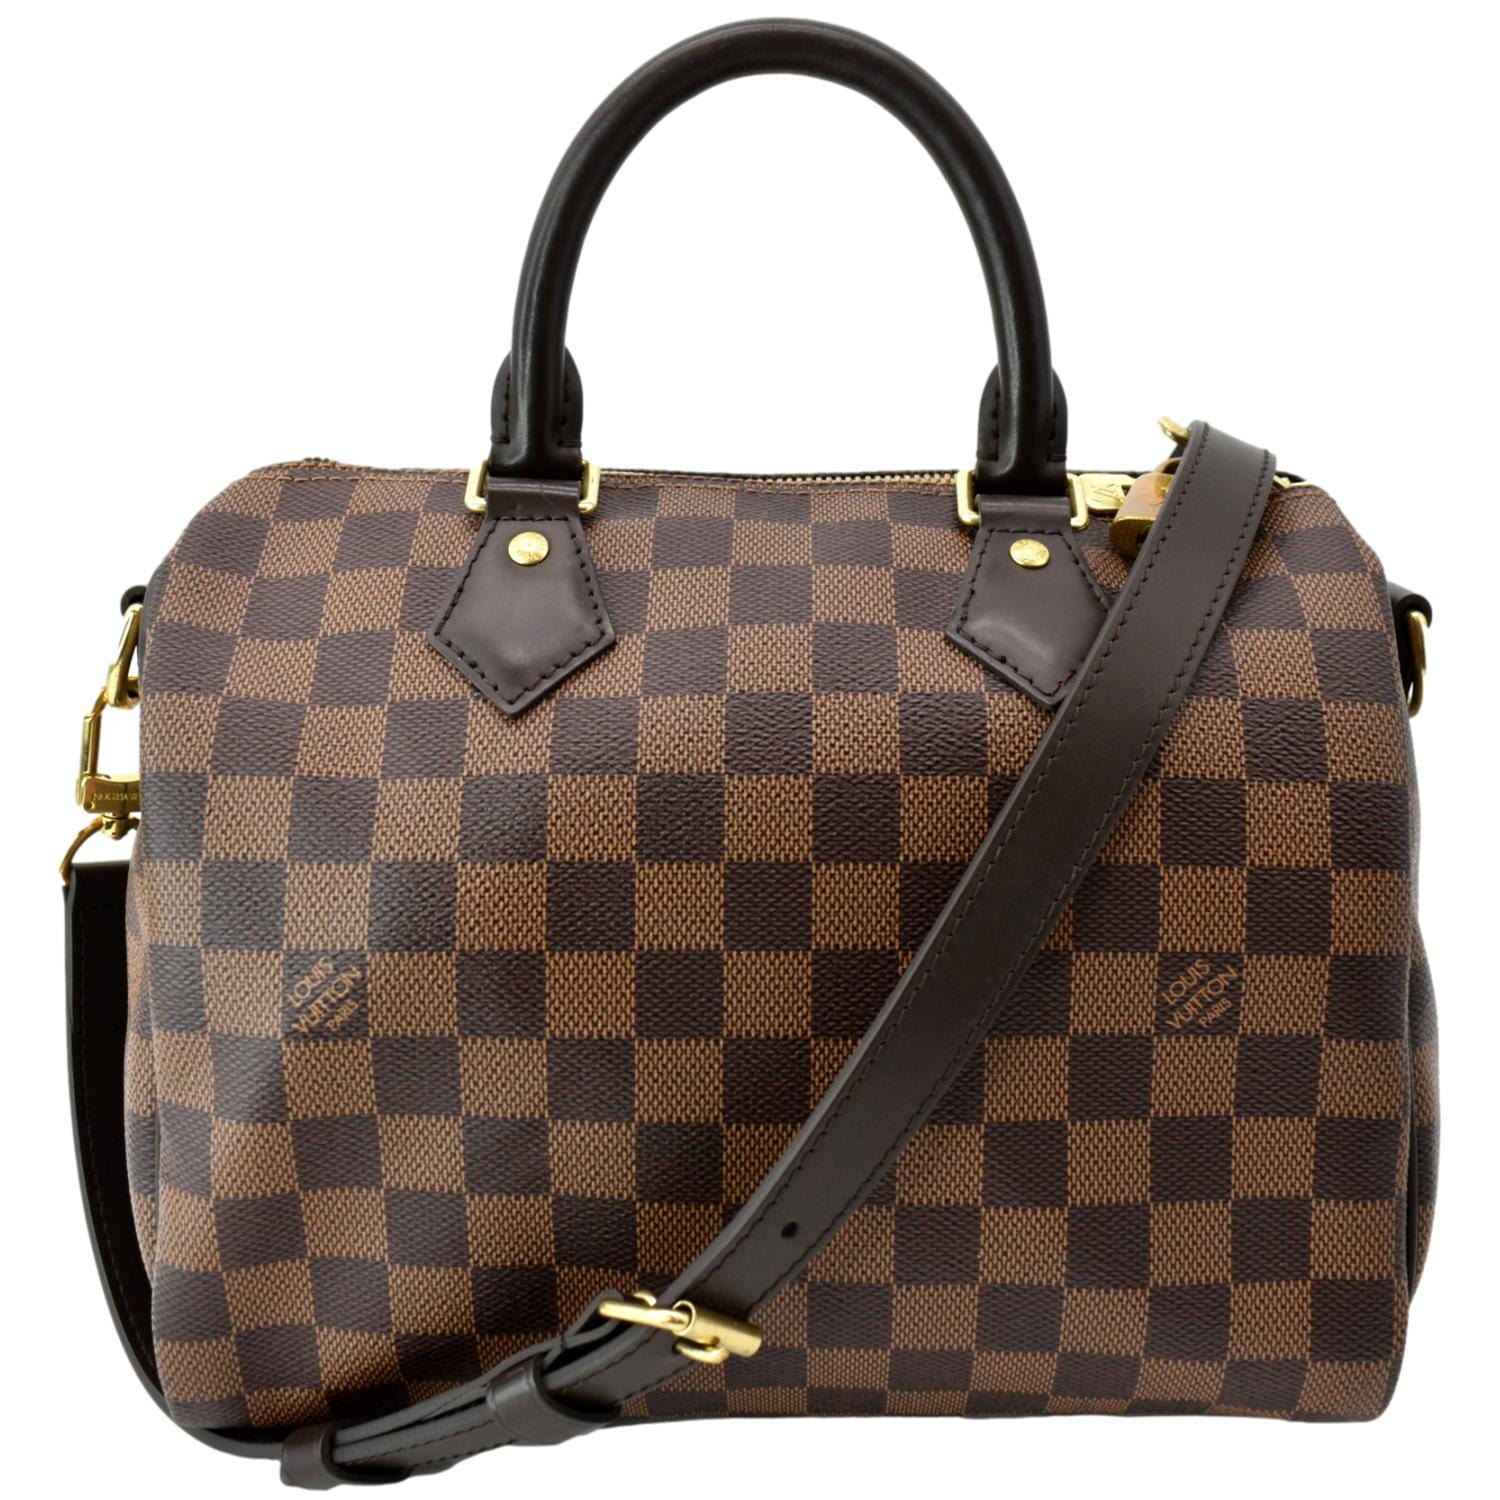 Just got my new speedy bandouliere 25 in damier ebene and it's